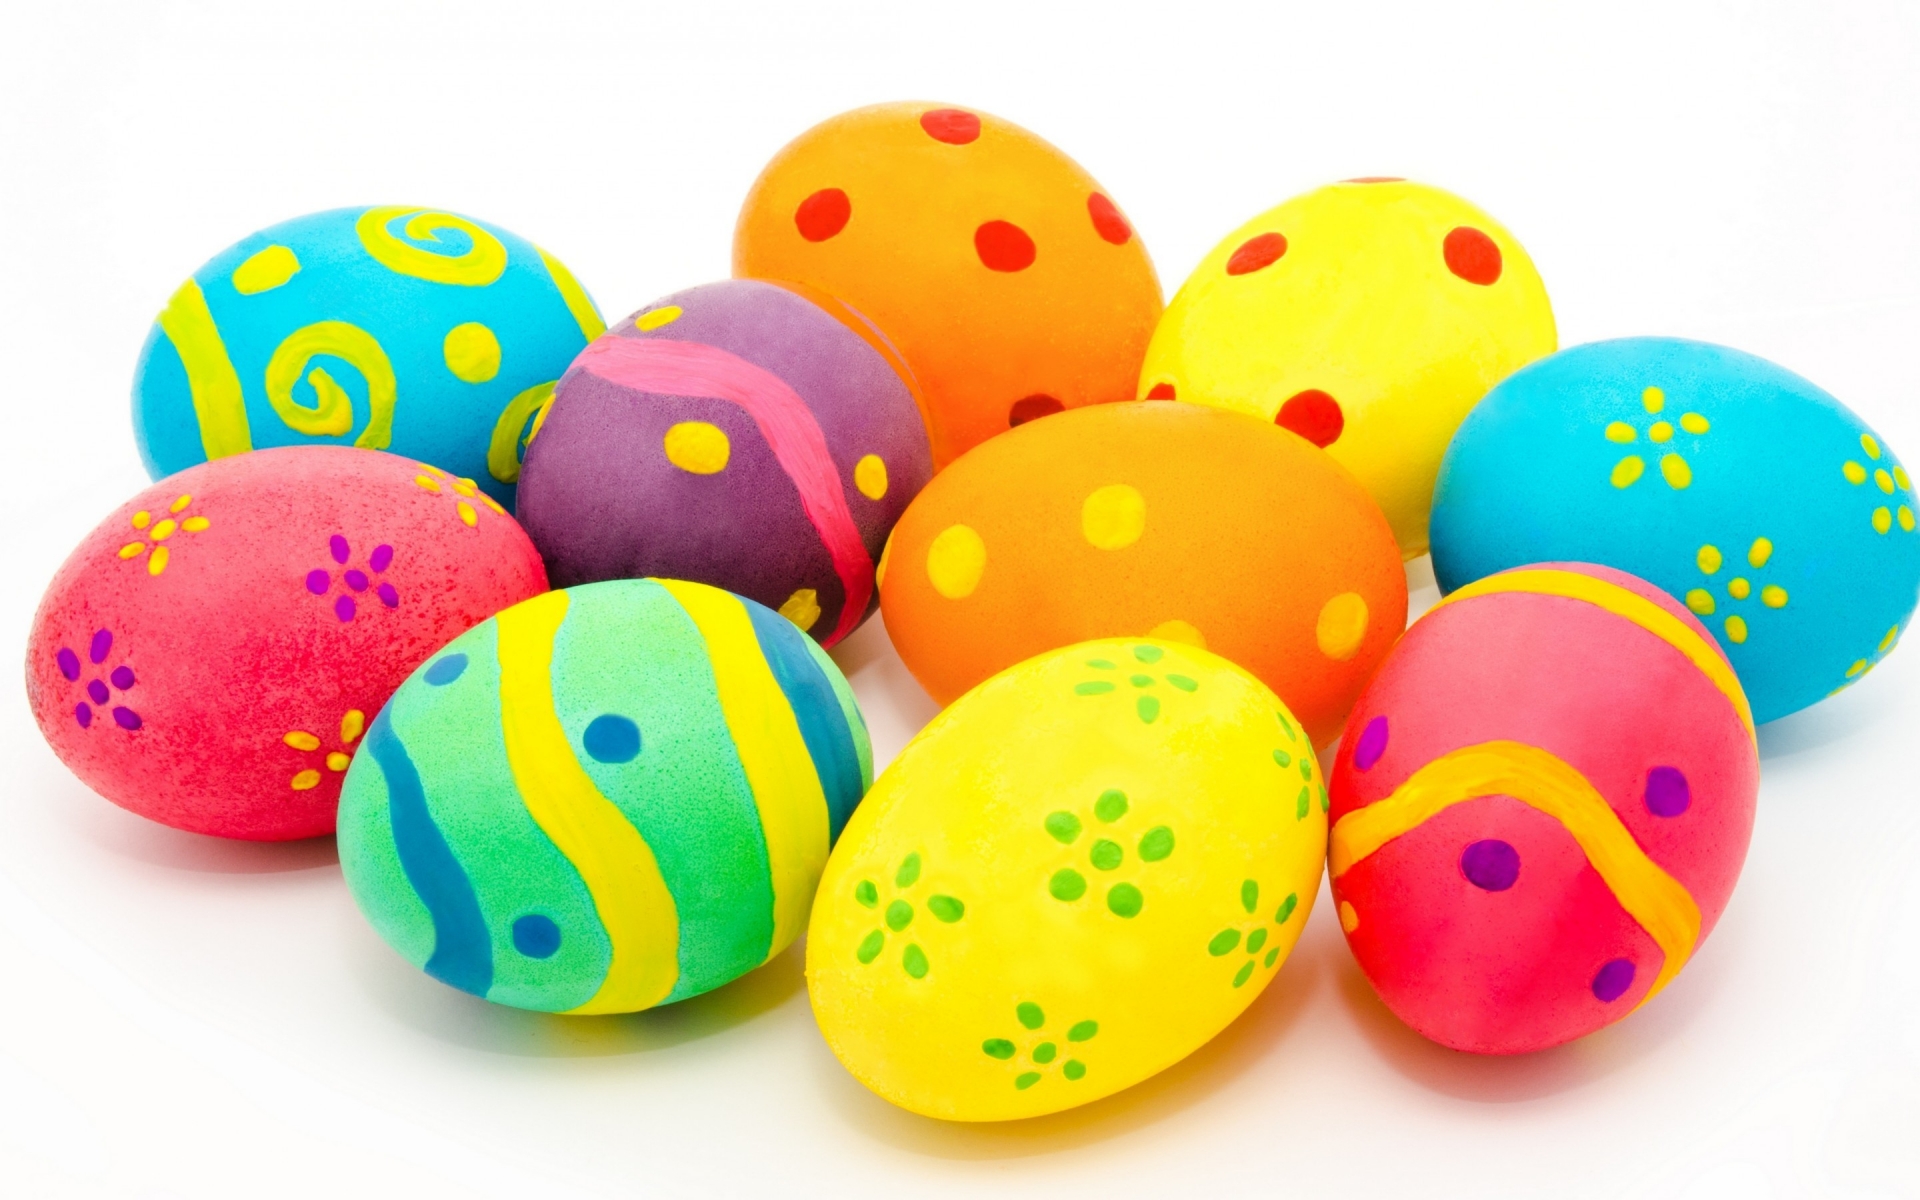 Many Colorful Easter Eggs for 1920 x 1200 widescreen resolution